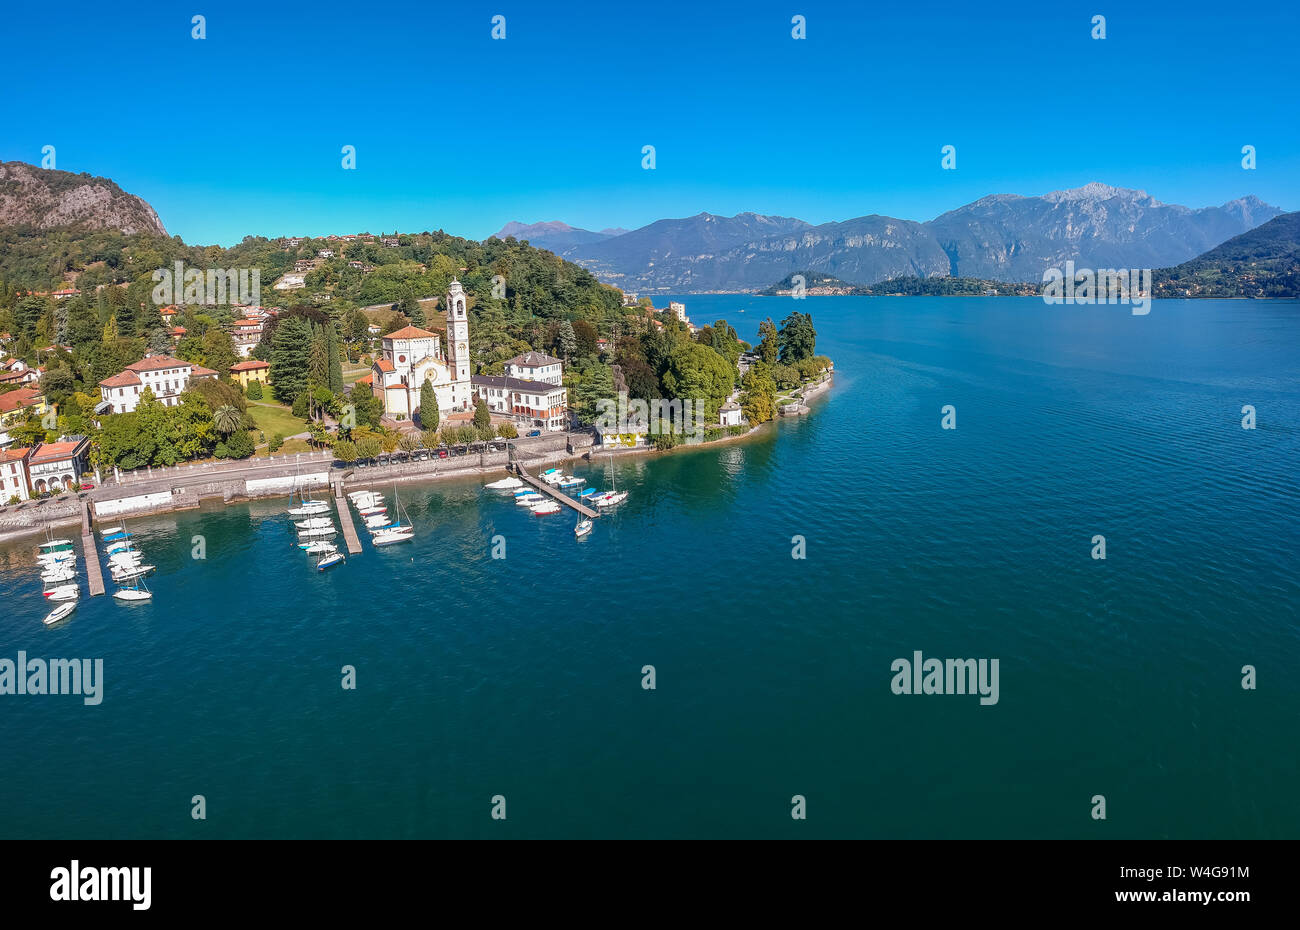 Aerial view landscape on beatiful Lake Como in Tremezzina, Lombardy, Italy. Scenic small town with traditional houses and clear blue water. Summer tou Stock Photo